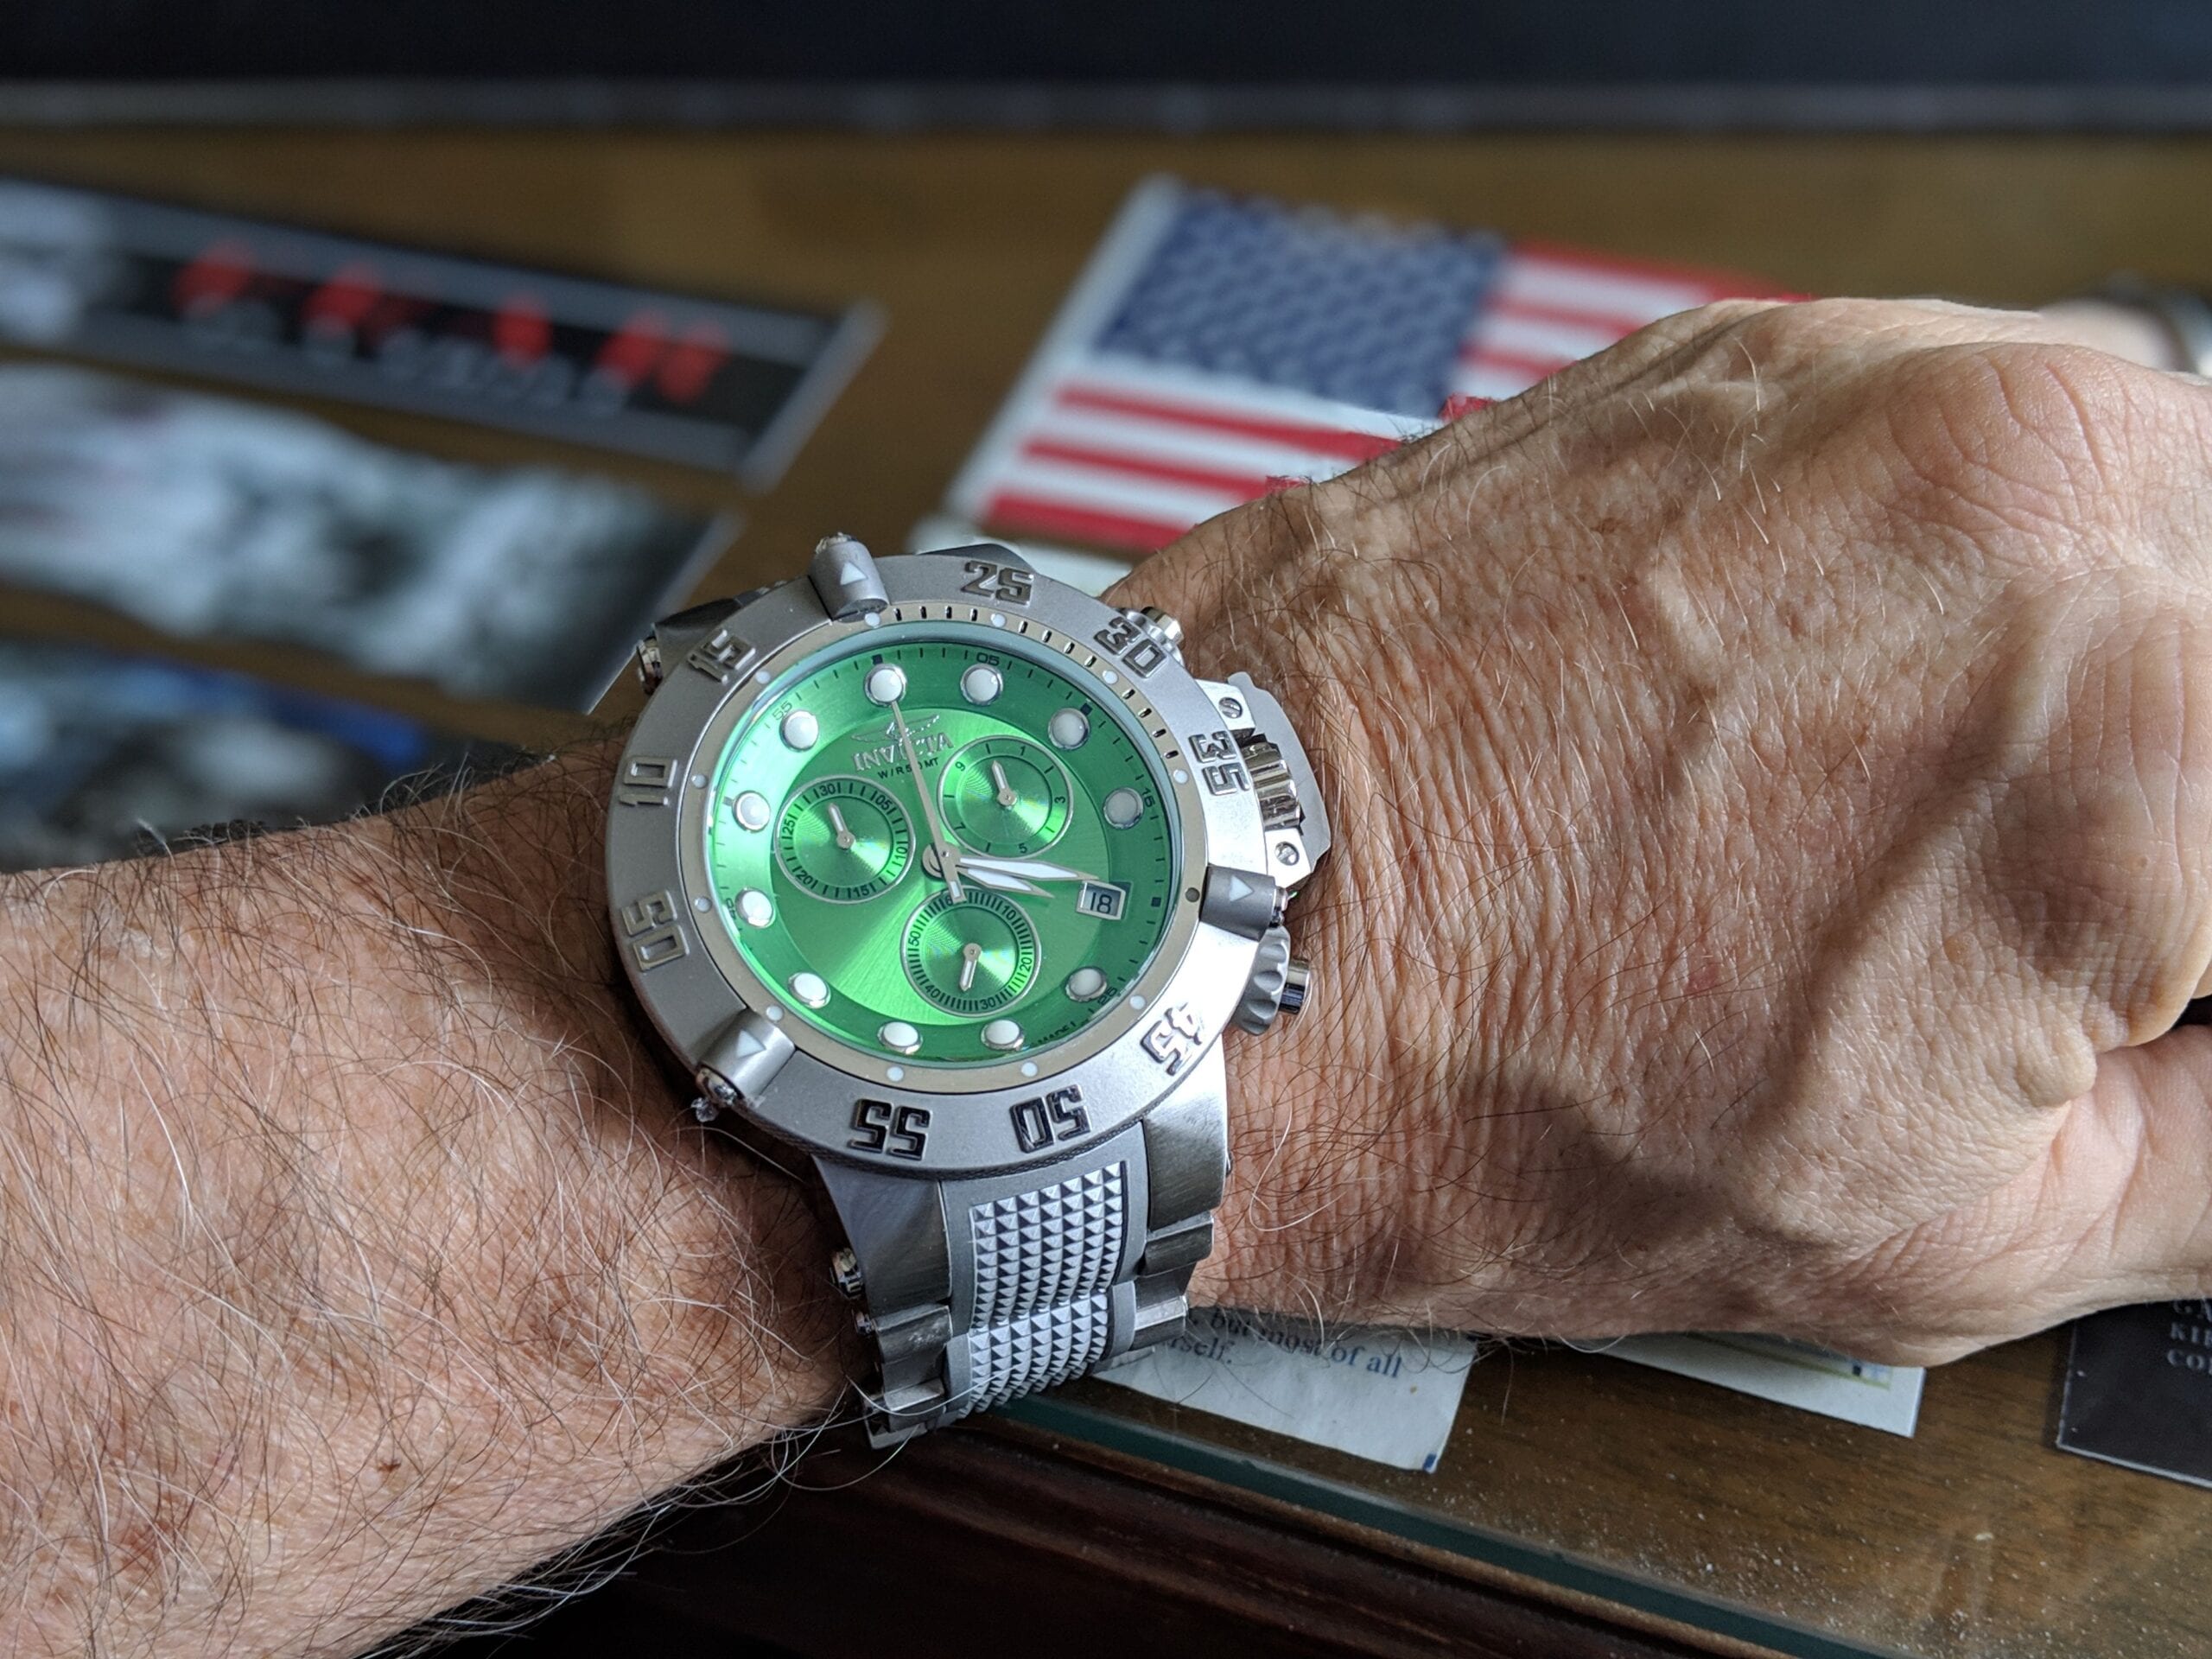 Invicta Watch with green face